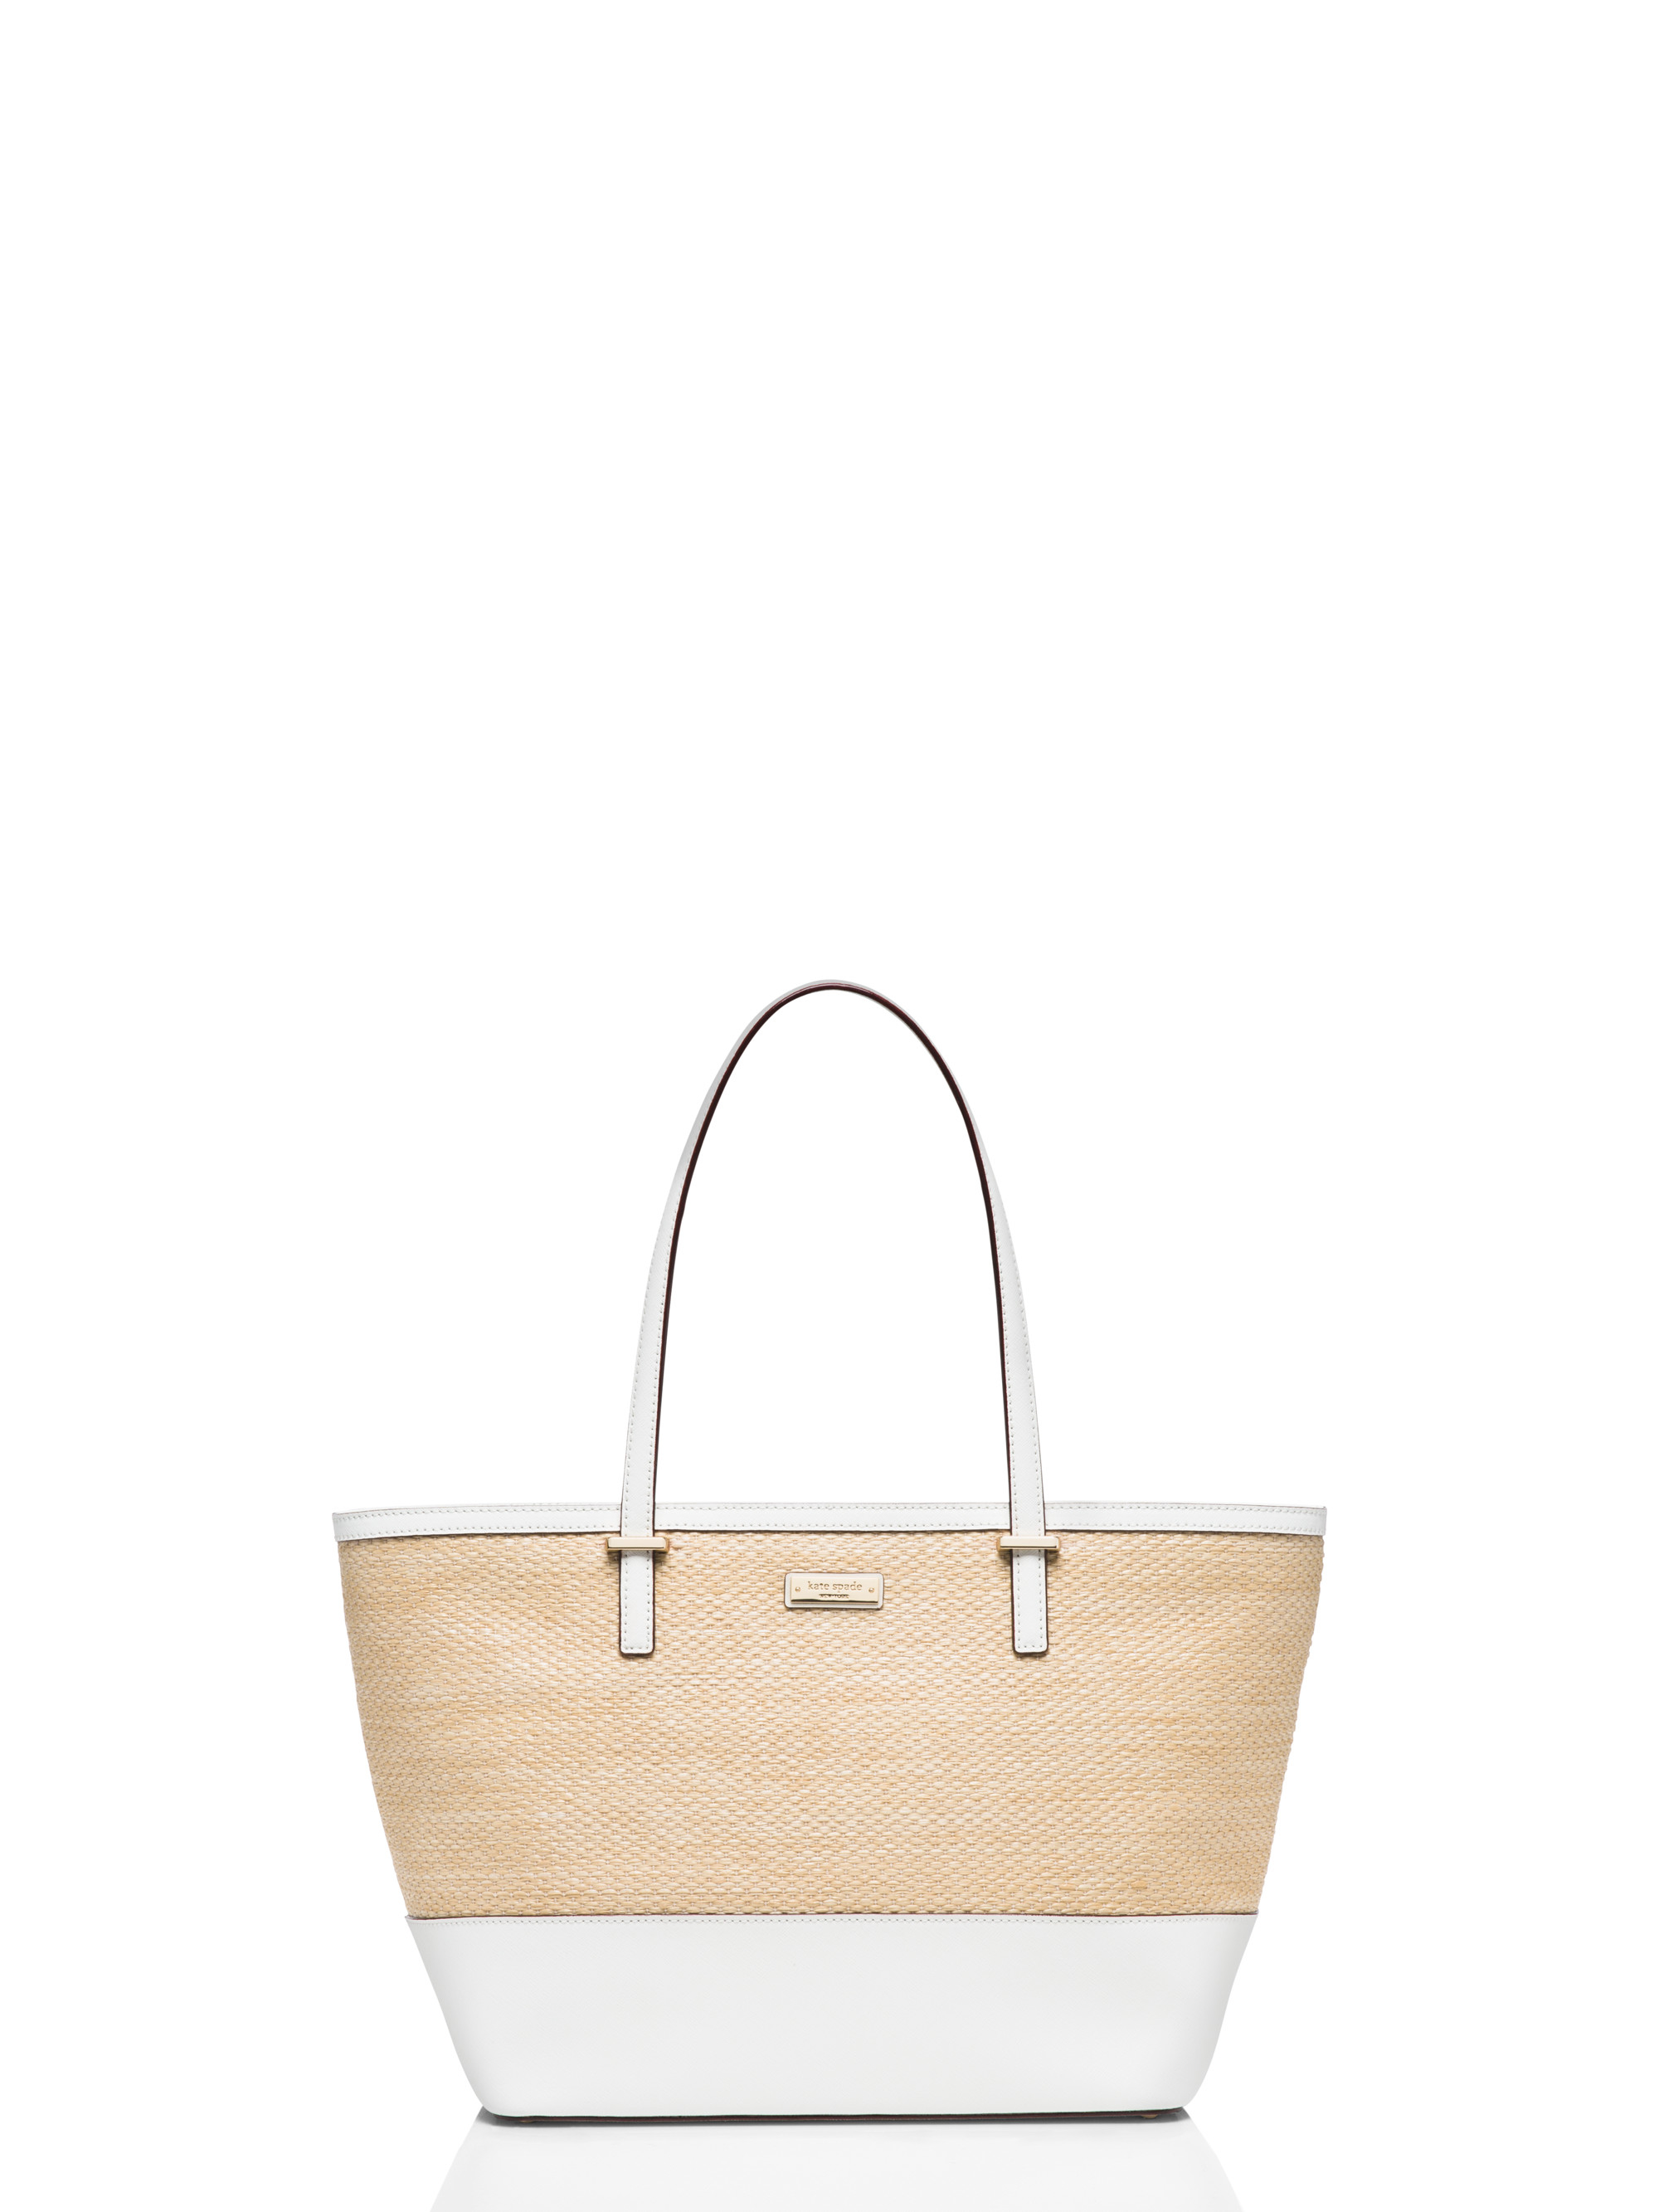 kate spade new york naturalbright white cedar street straw small harmony beige product 0 113489872 normal